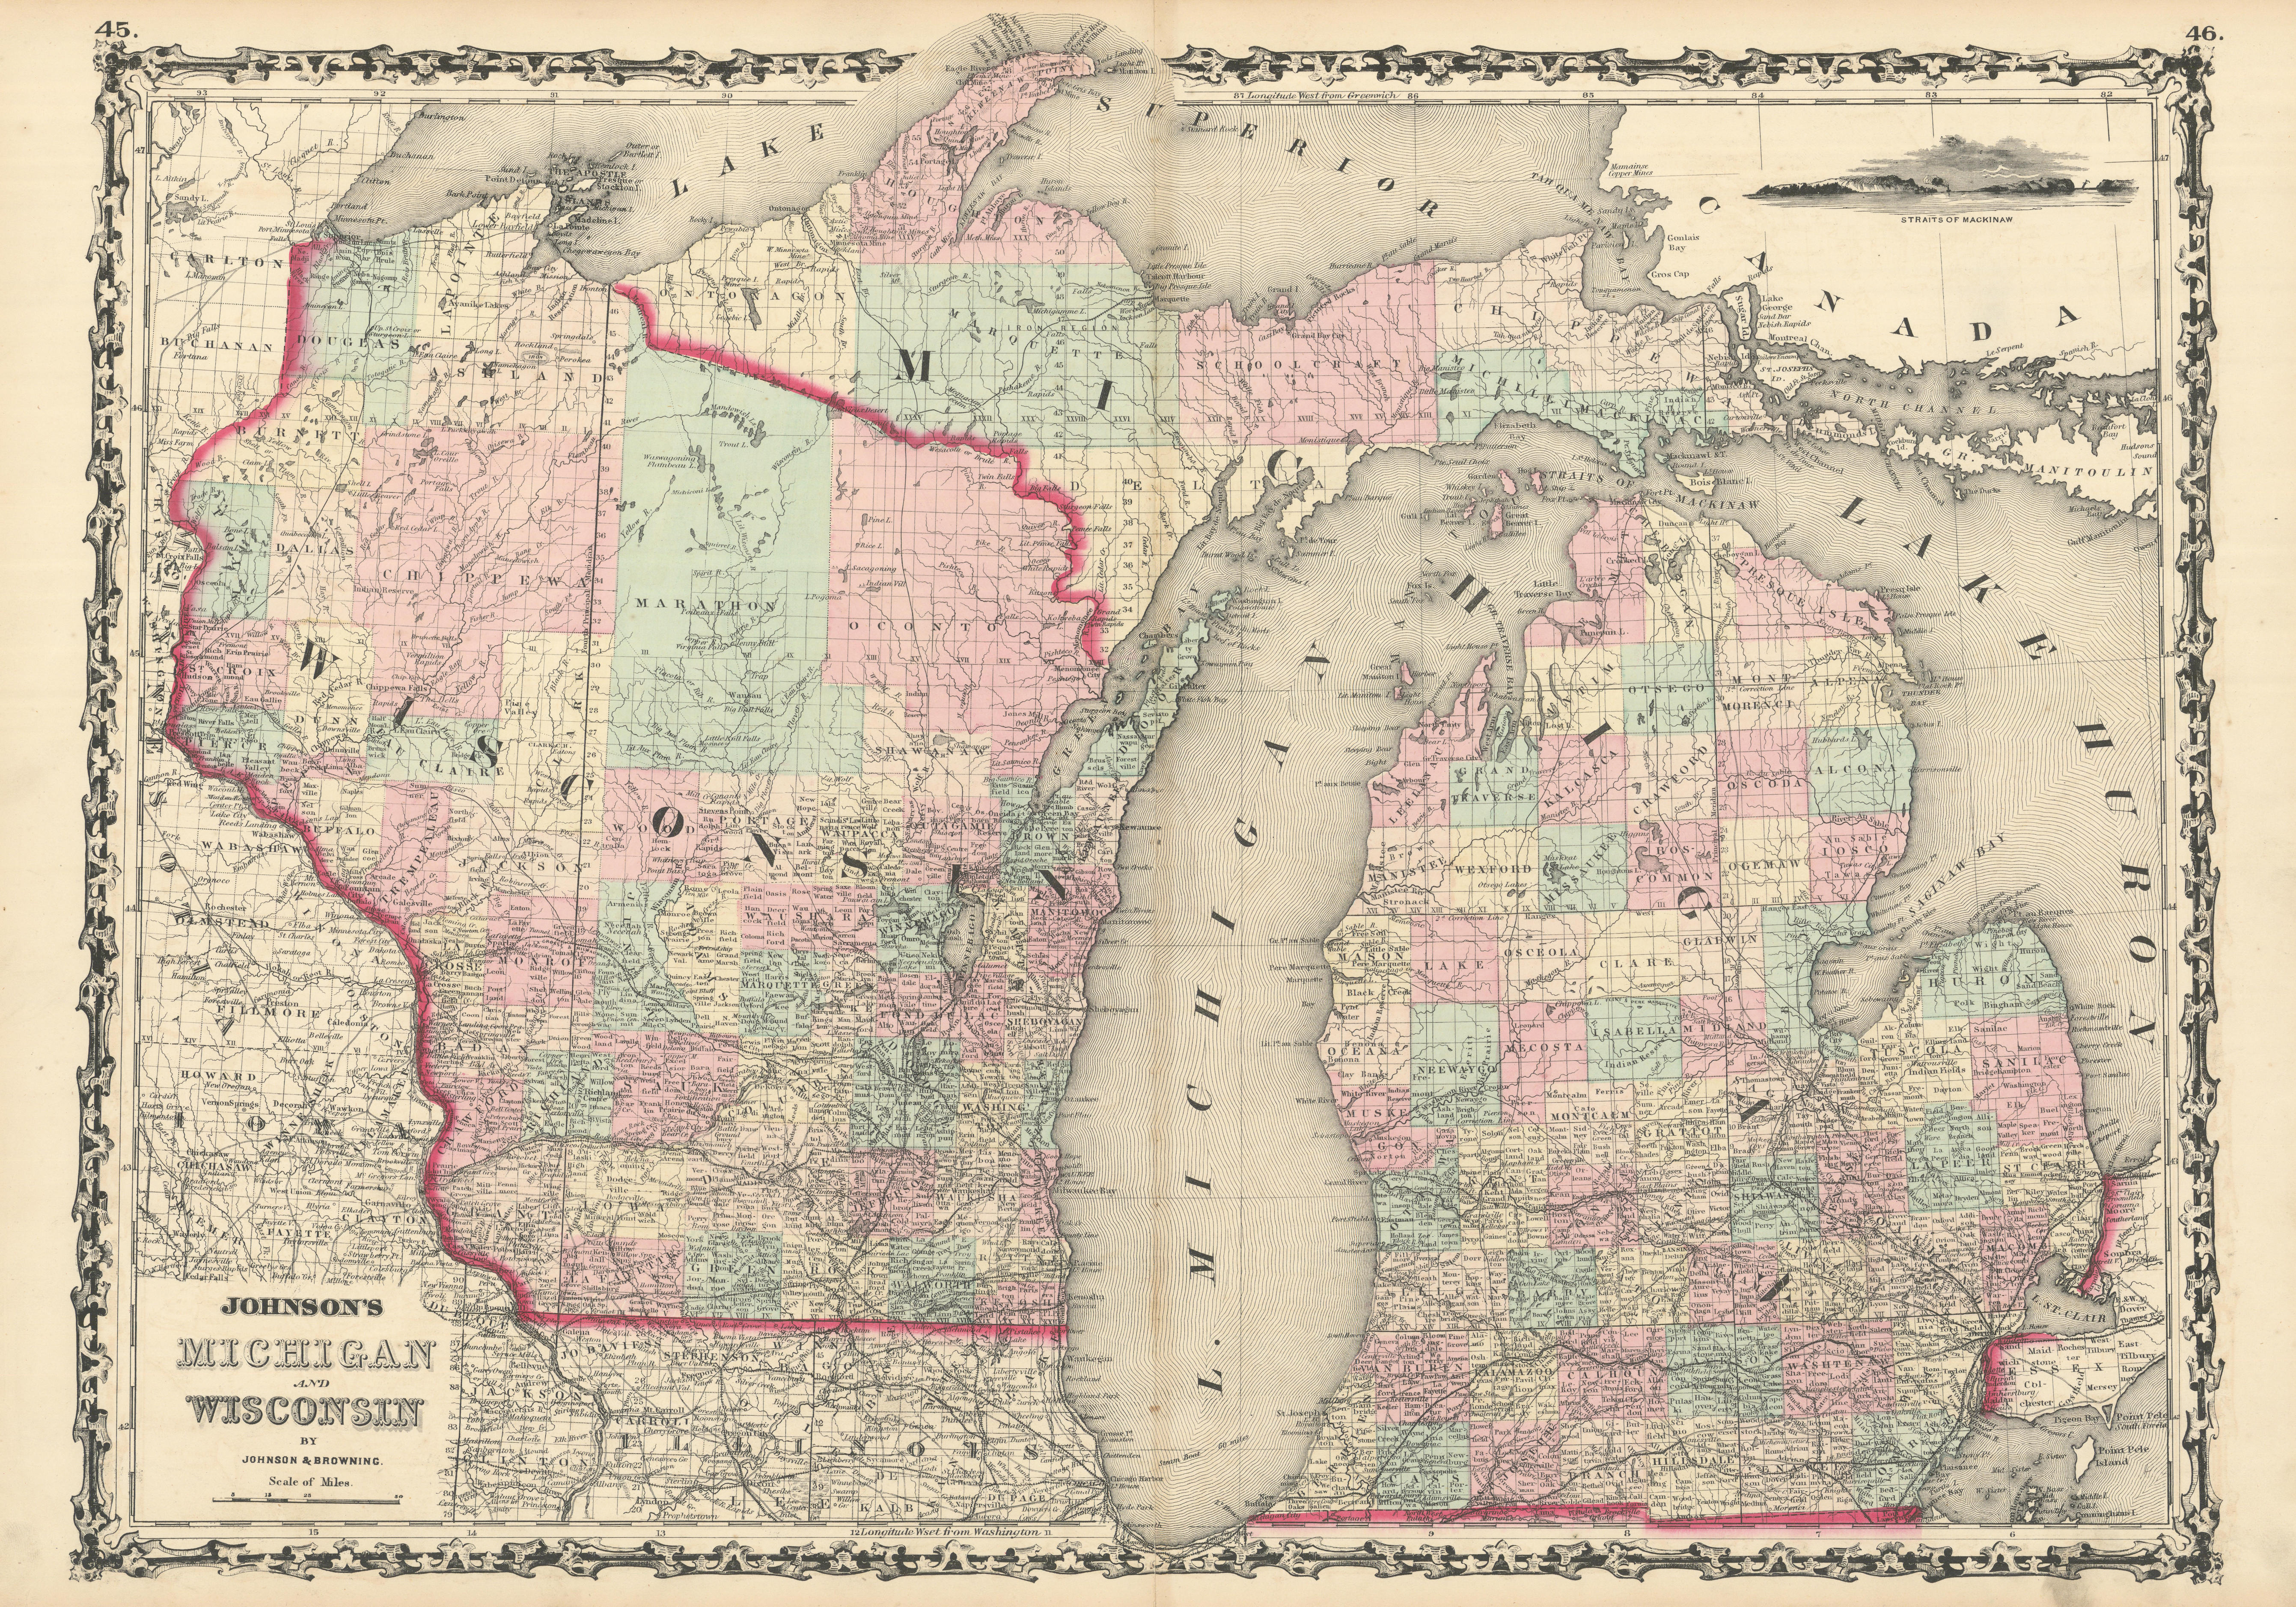 Associate Product Johnson's Wisconsin & Michigan. State map showing counties. Great Lakes 1861